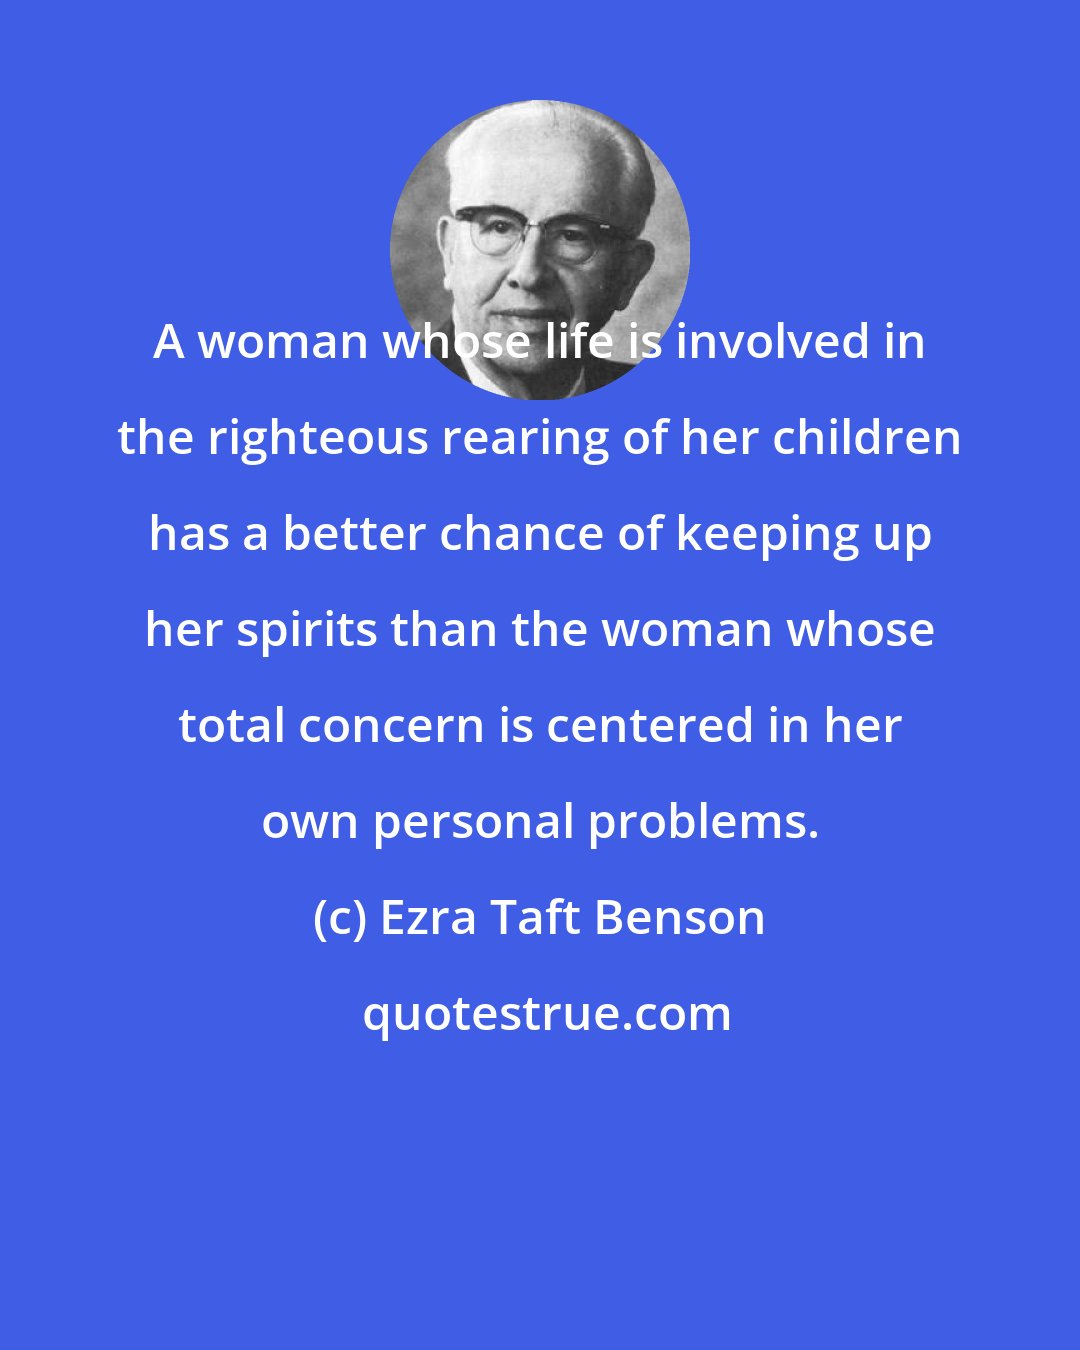 Ezra Taft Benson: A woman whose life is involved in the righteous rearing of her children has a better chance of keeping up her spirits than the woman whose total concern is centered in her own personal problems.